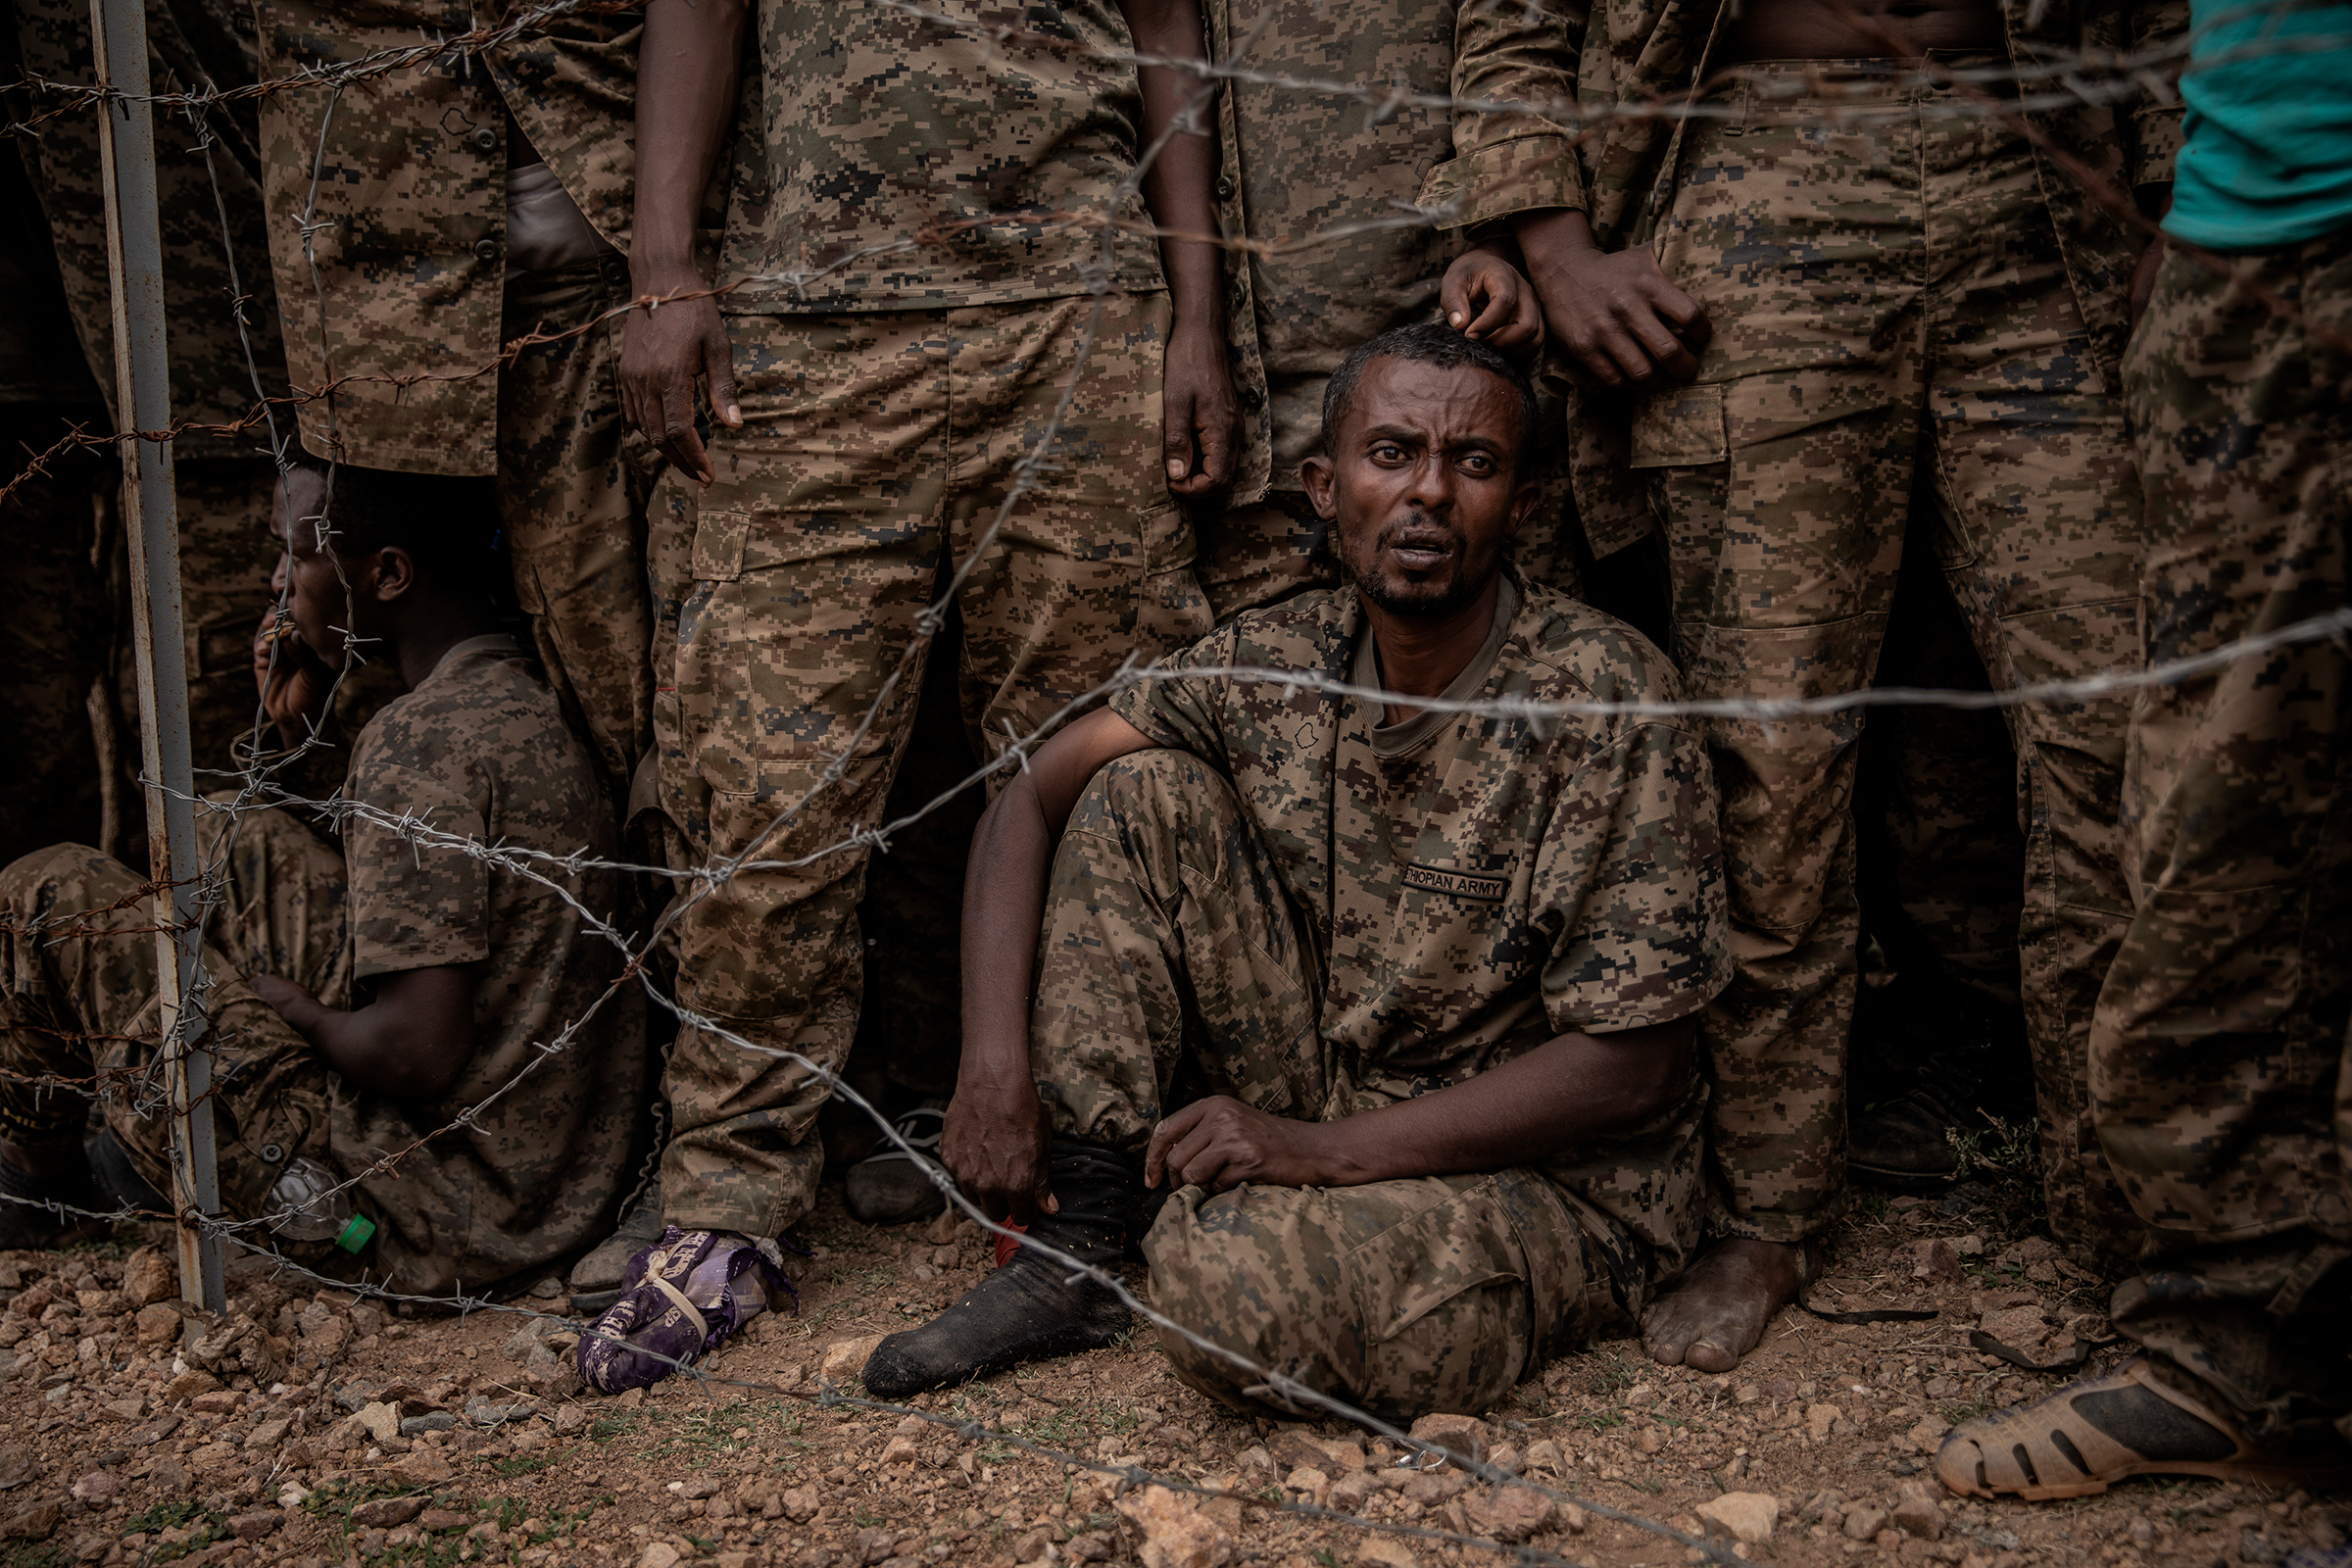 Ethiopian National Defense Forces soldiers are held at a remote mountain detention camp for an estimated 3,000 prisoners of war after being captured last week by Tigray Defense Force rebels during fighting south of the city of Mekelle in Ethiopia's northern Tigray region on June 23, 2021.  Most of the captured soldiers had their boots confiscated. Finbarr O'Reilly for The New York Times